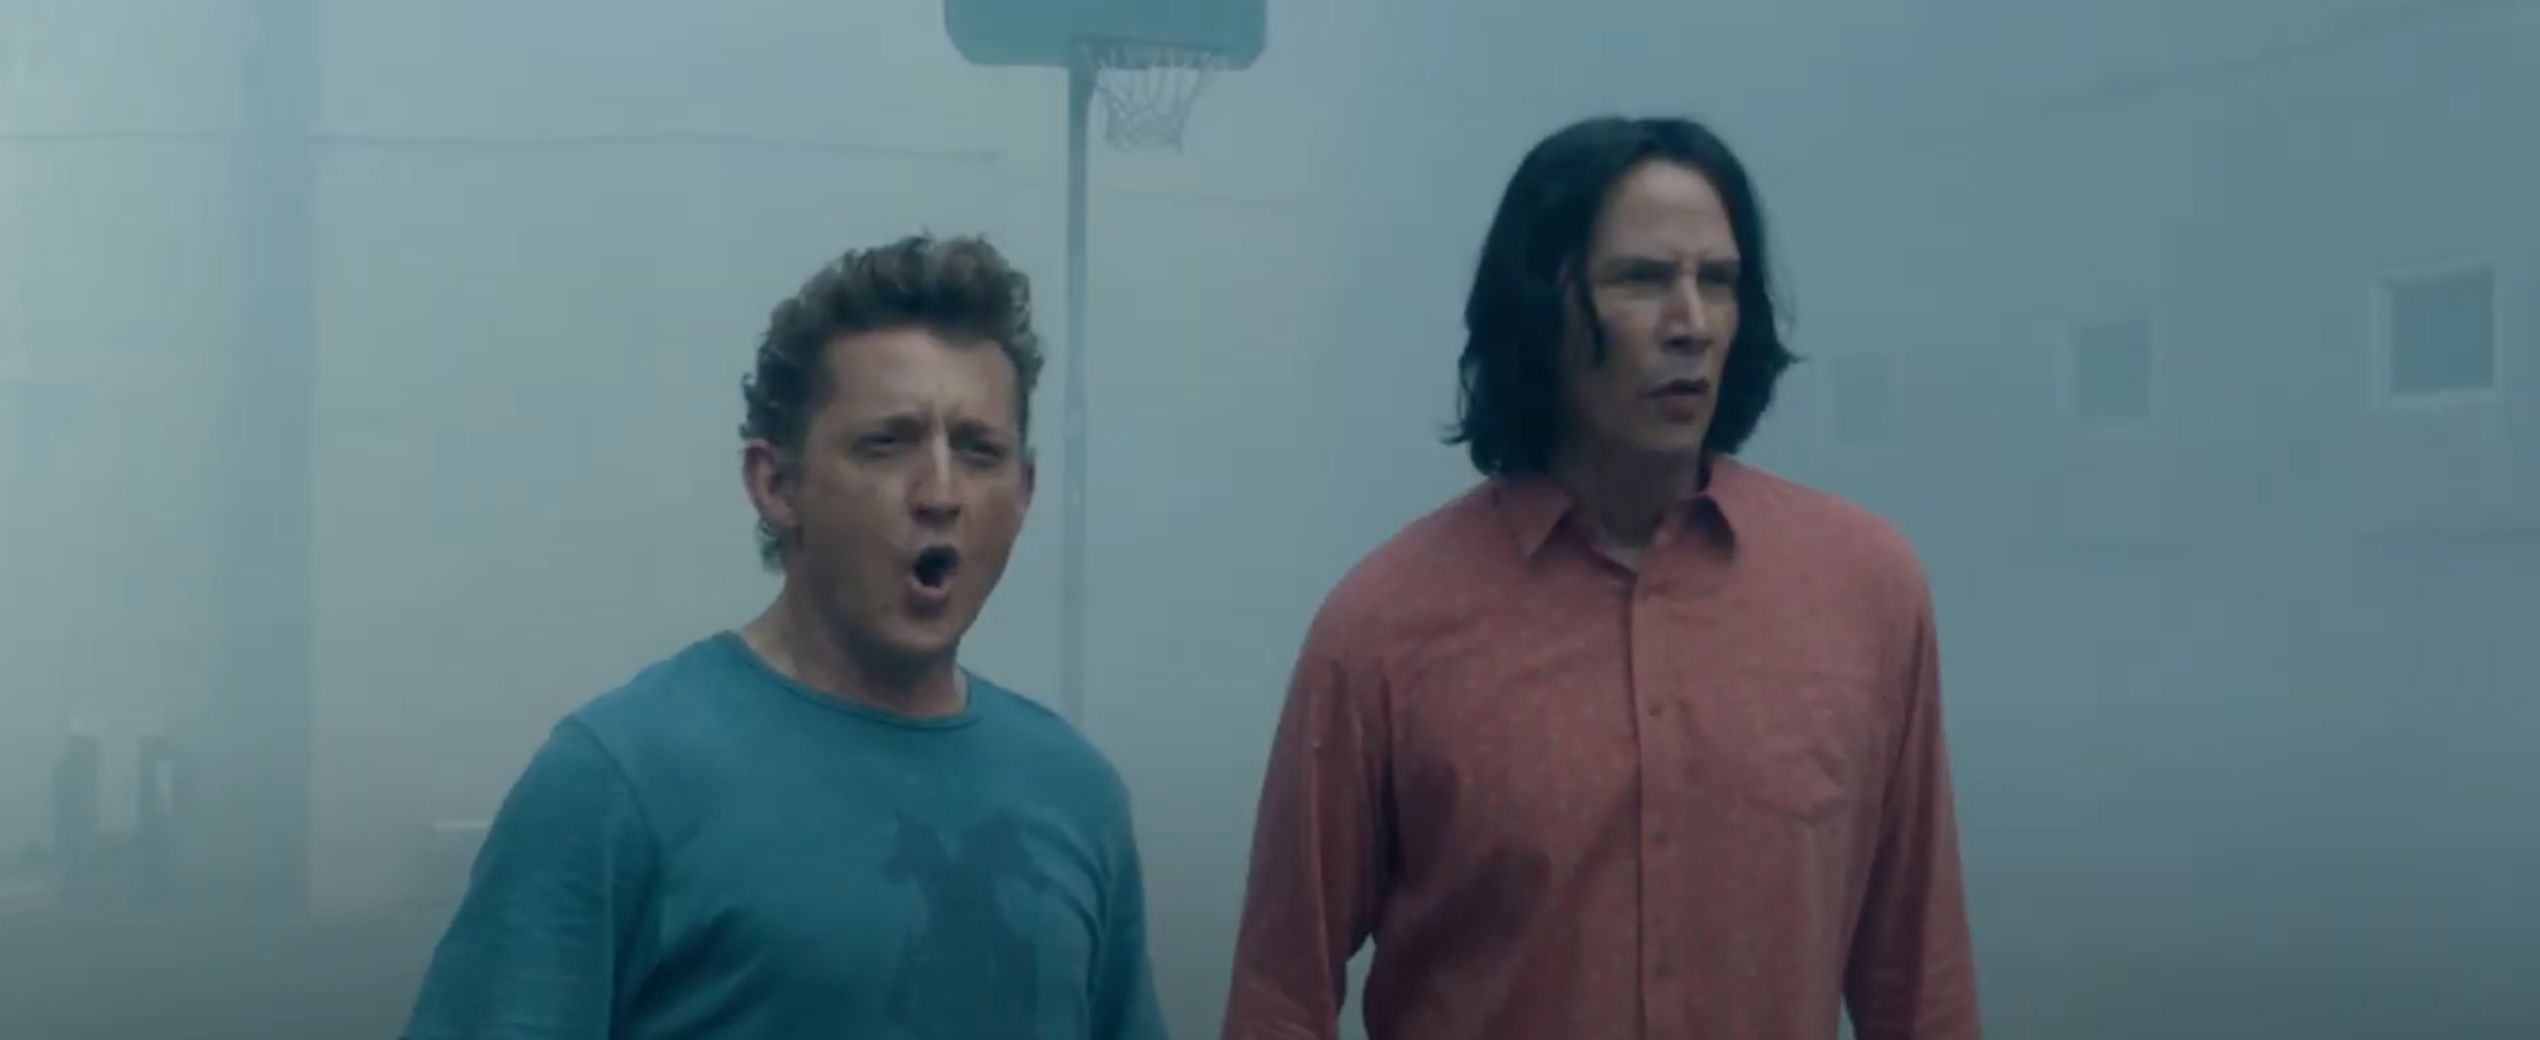 Bill and Ted Face The Music Trailer Image #30